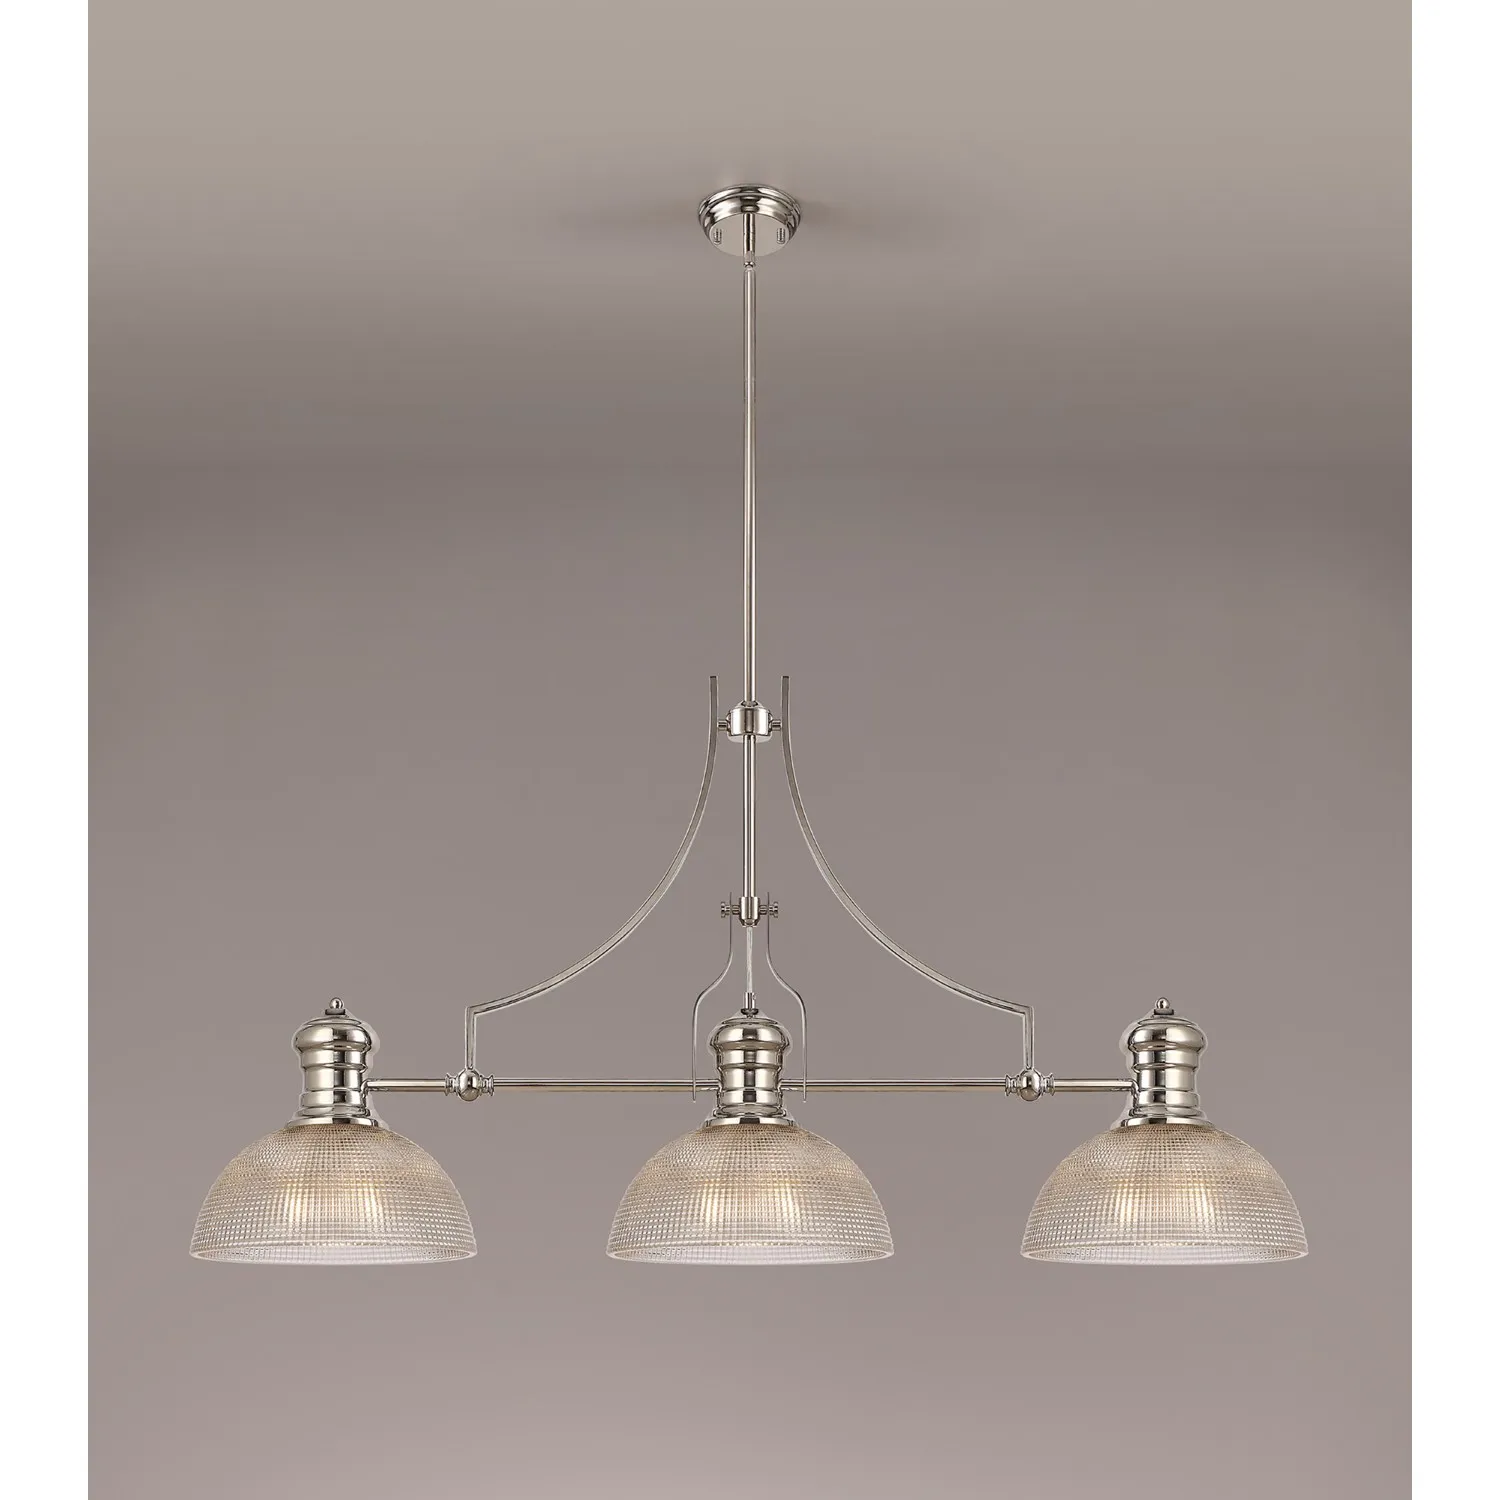 Sandy 3 Light Linear Pendant E27 With 30cm Prismatic Glass Shade, Polished Nickel, Clear